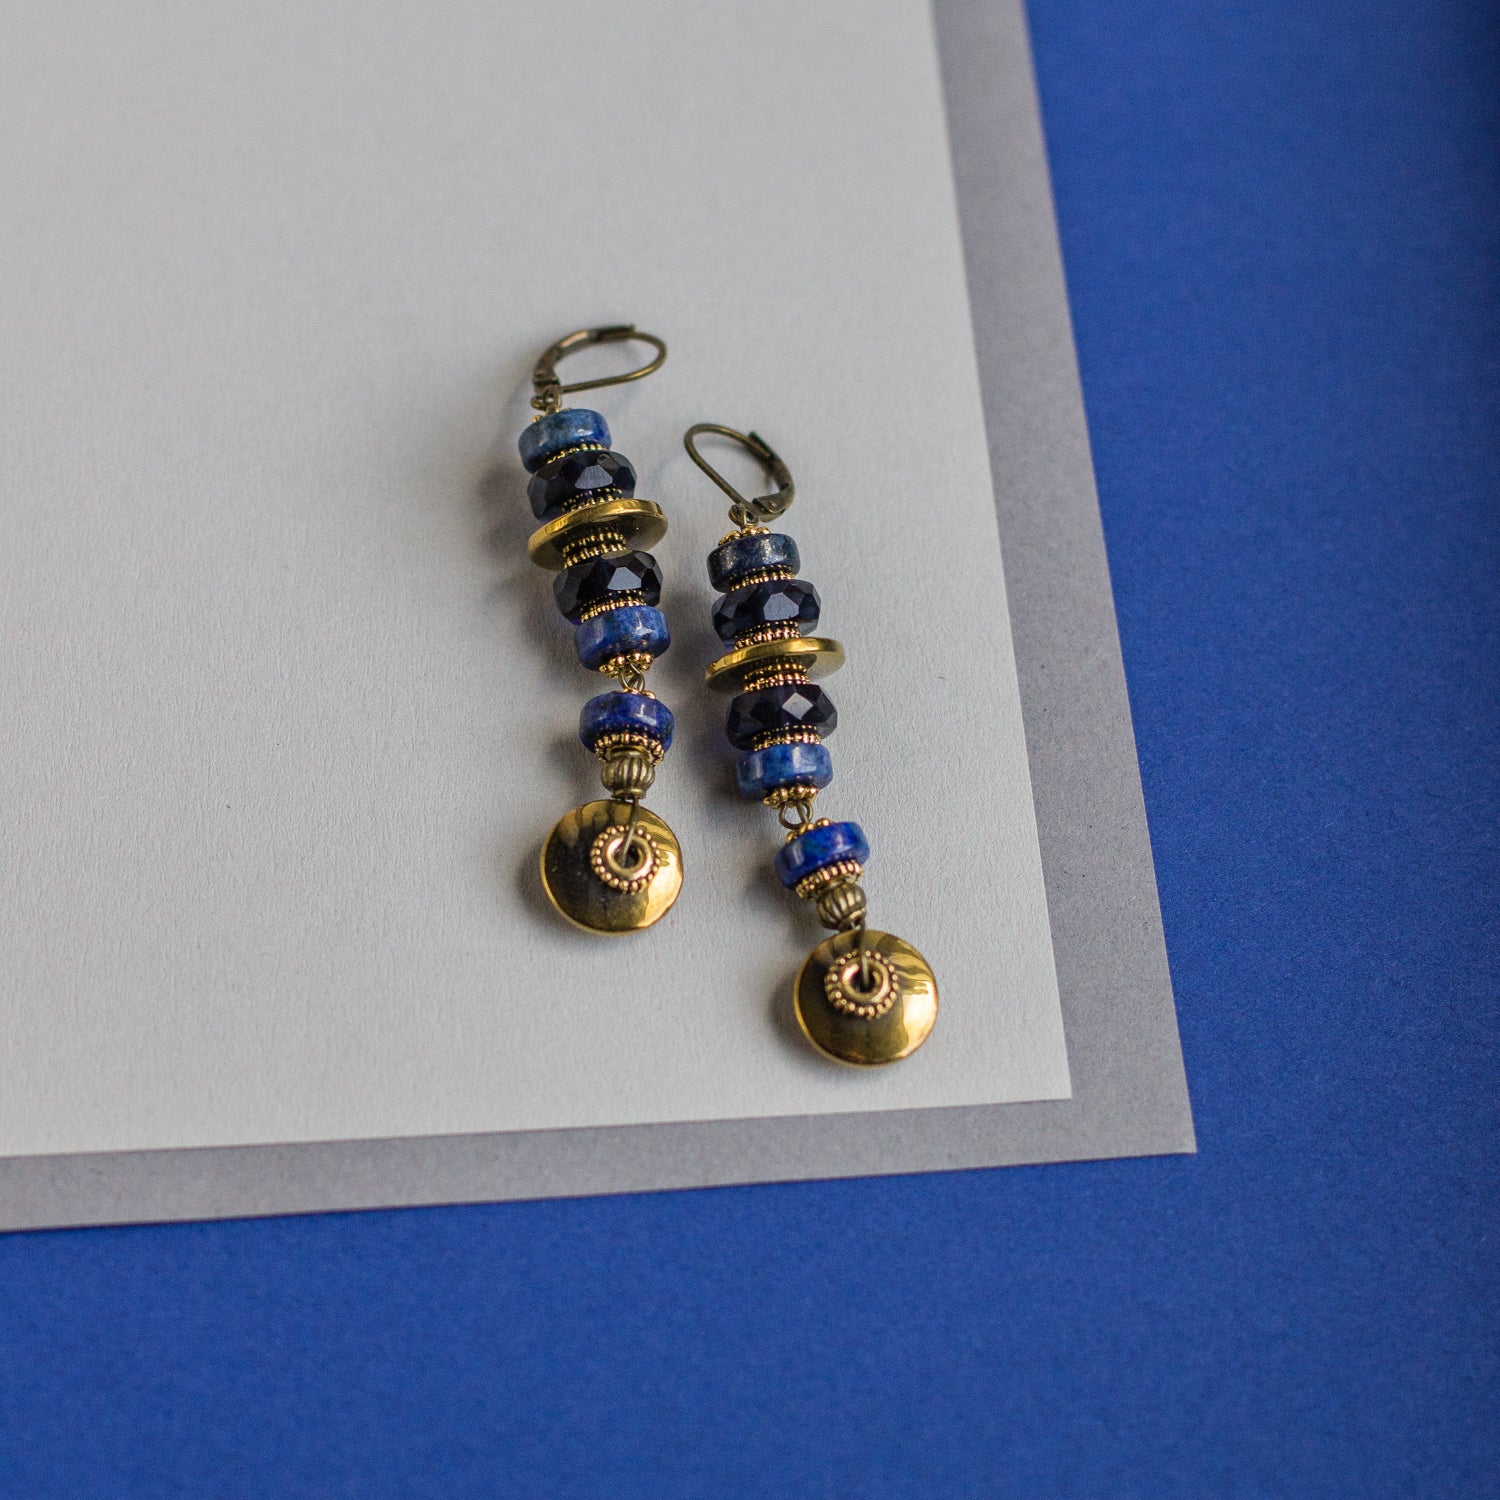 Find the perfect gift with these one-of-a-kind, handmade long-hanging earrings featuring beautiful blue, black, and gold rondelles.